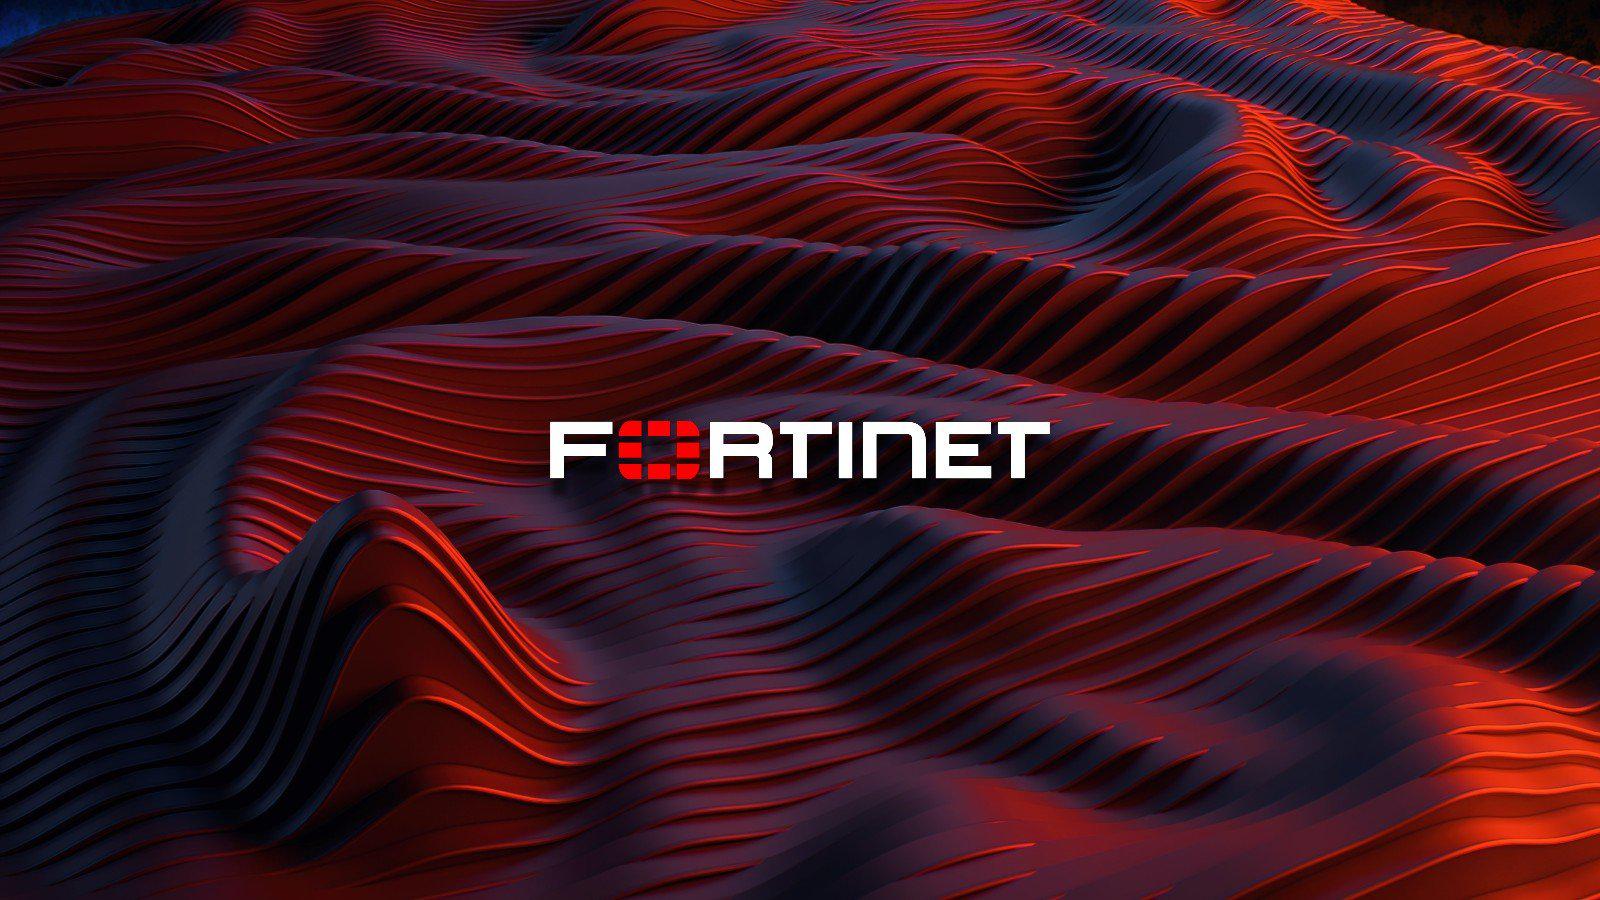 Fortinet warns of new FortiSIEM RCE bugs in confusing disclosure